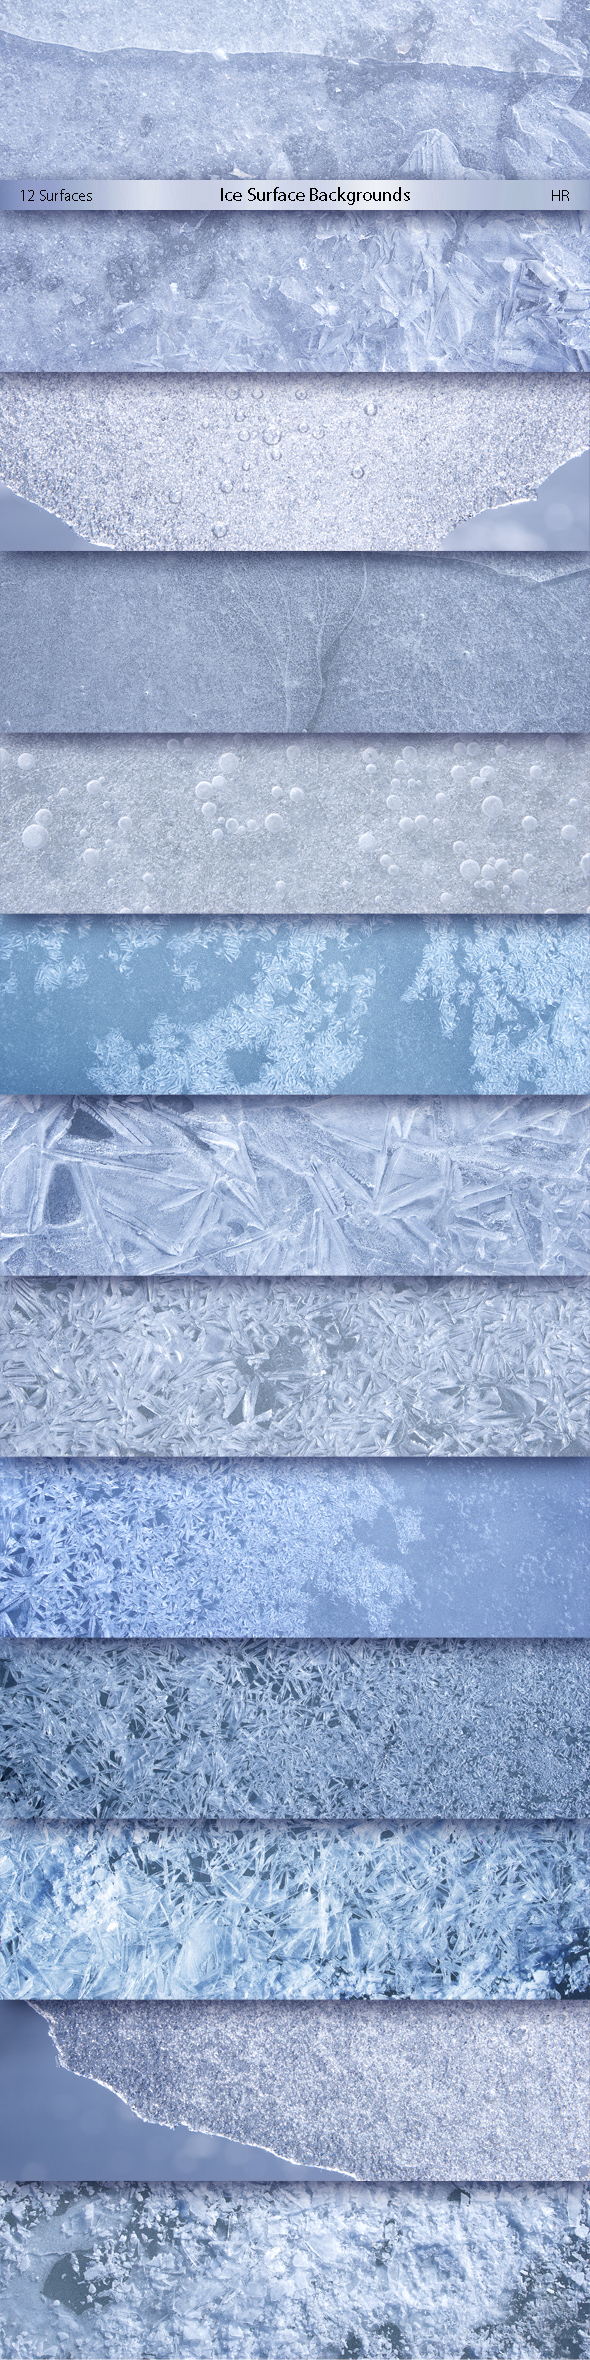 Ice Surface Backgrounds